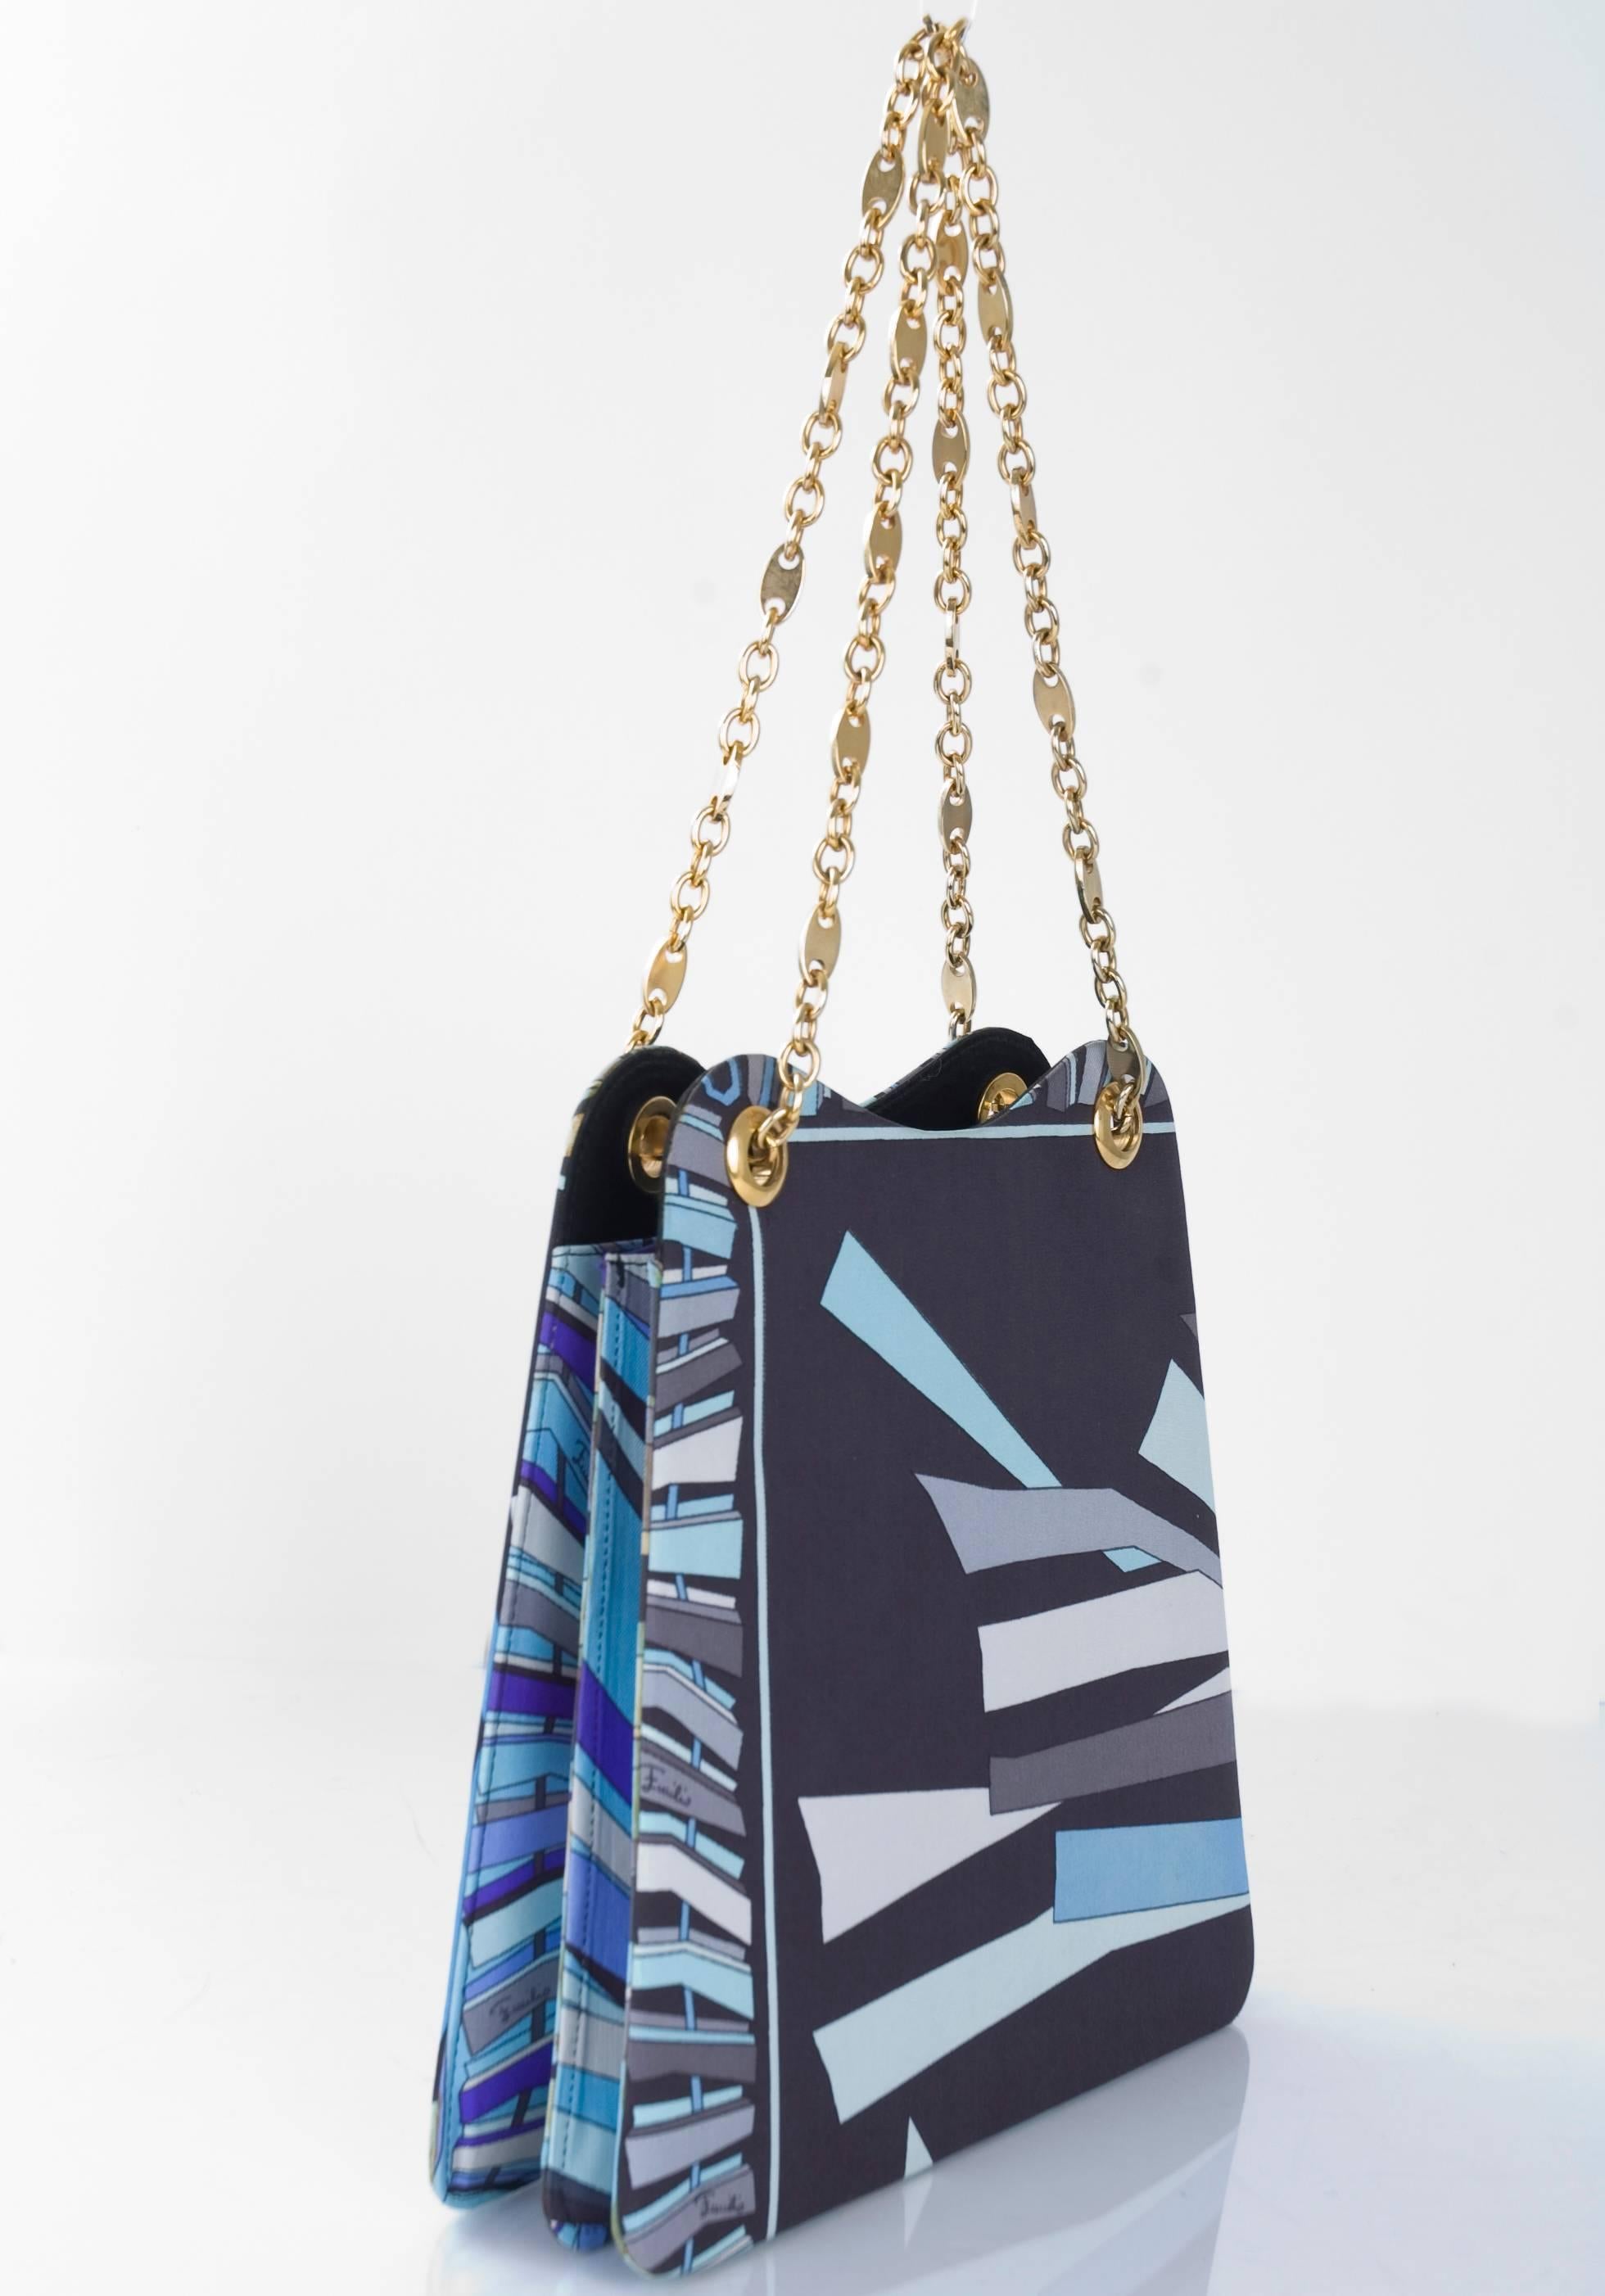 Women's  Emilio Pucci 1970s patterned blue vintage Purse & Matching Scarf  For Sale